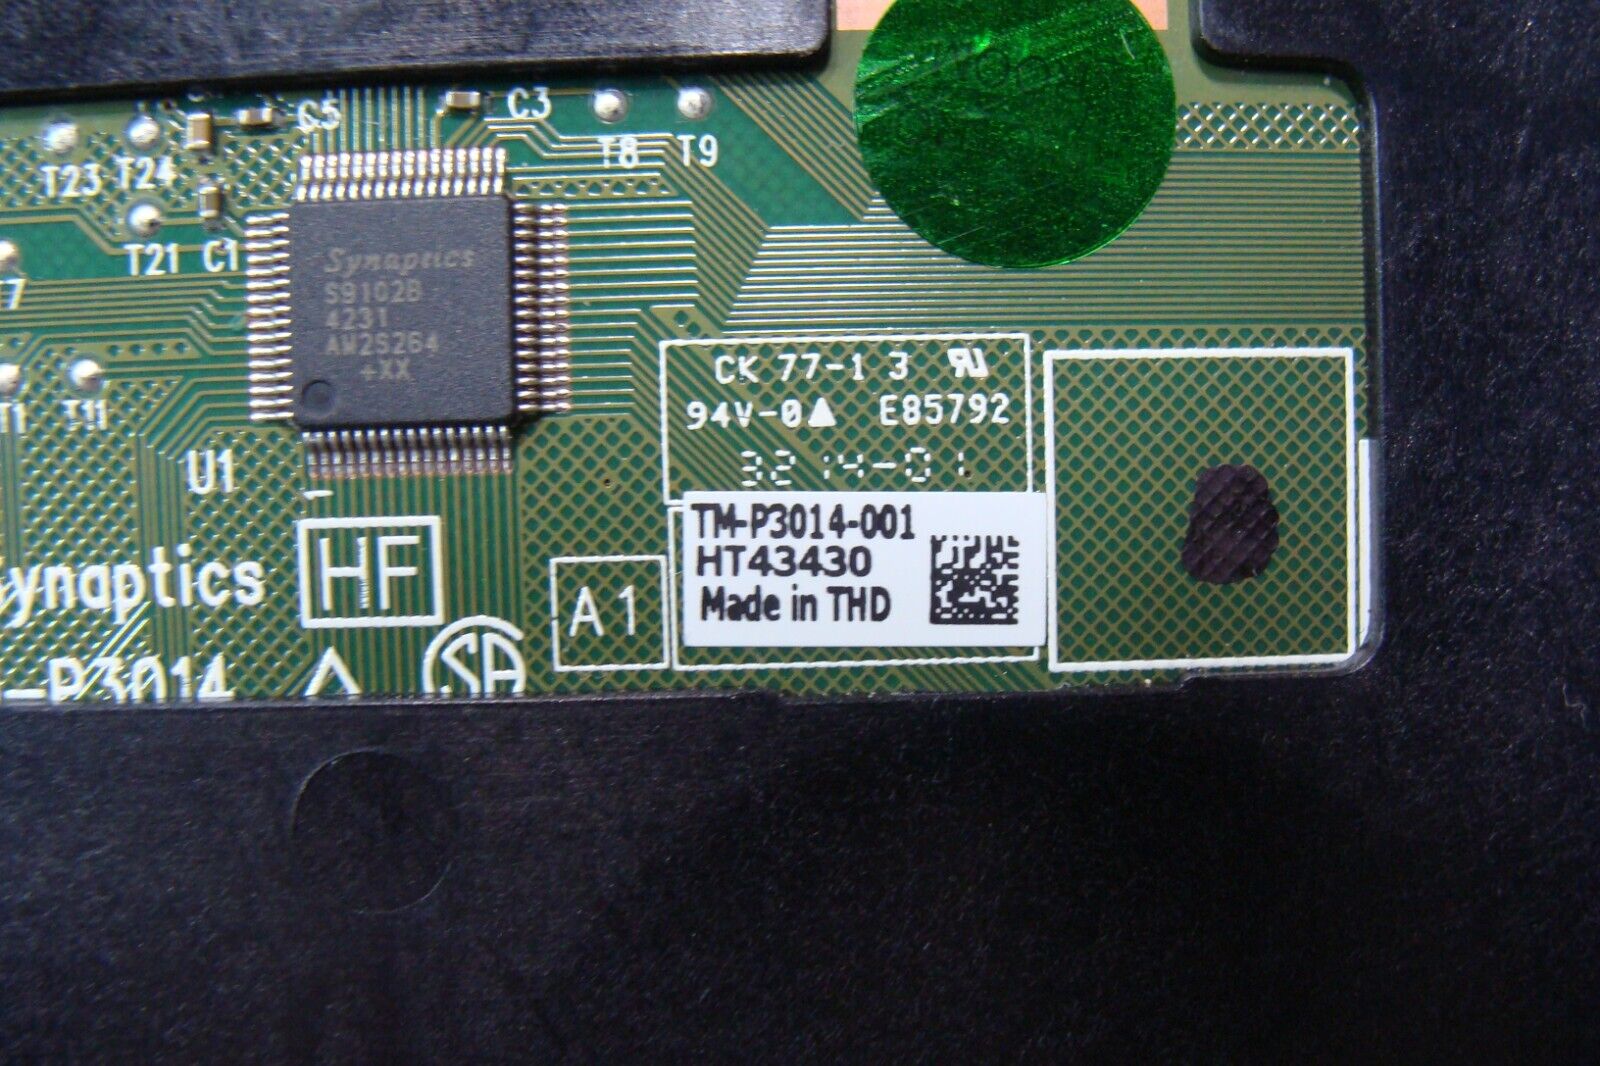 Dell Inspiron 15.6” 15 7547 Genuine Laptop TouchPad Board w/Cable TM-P3014-001